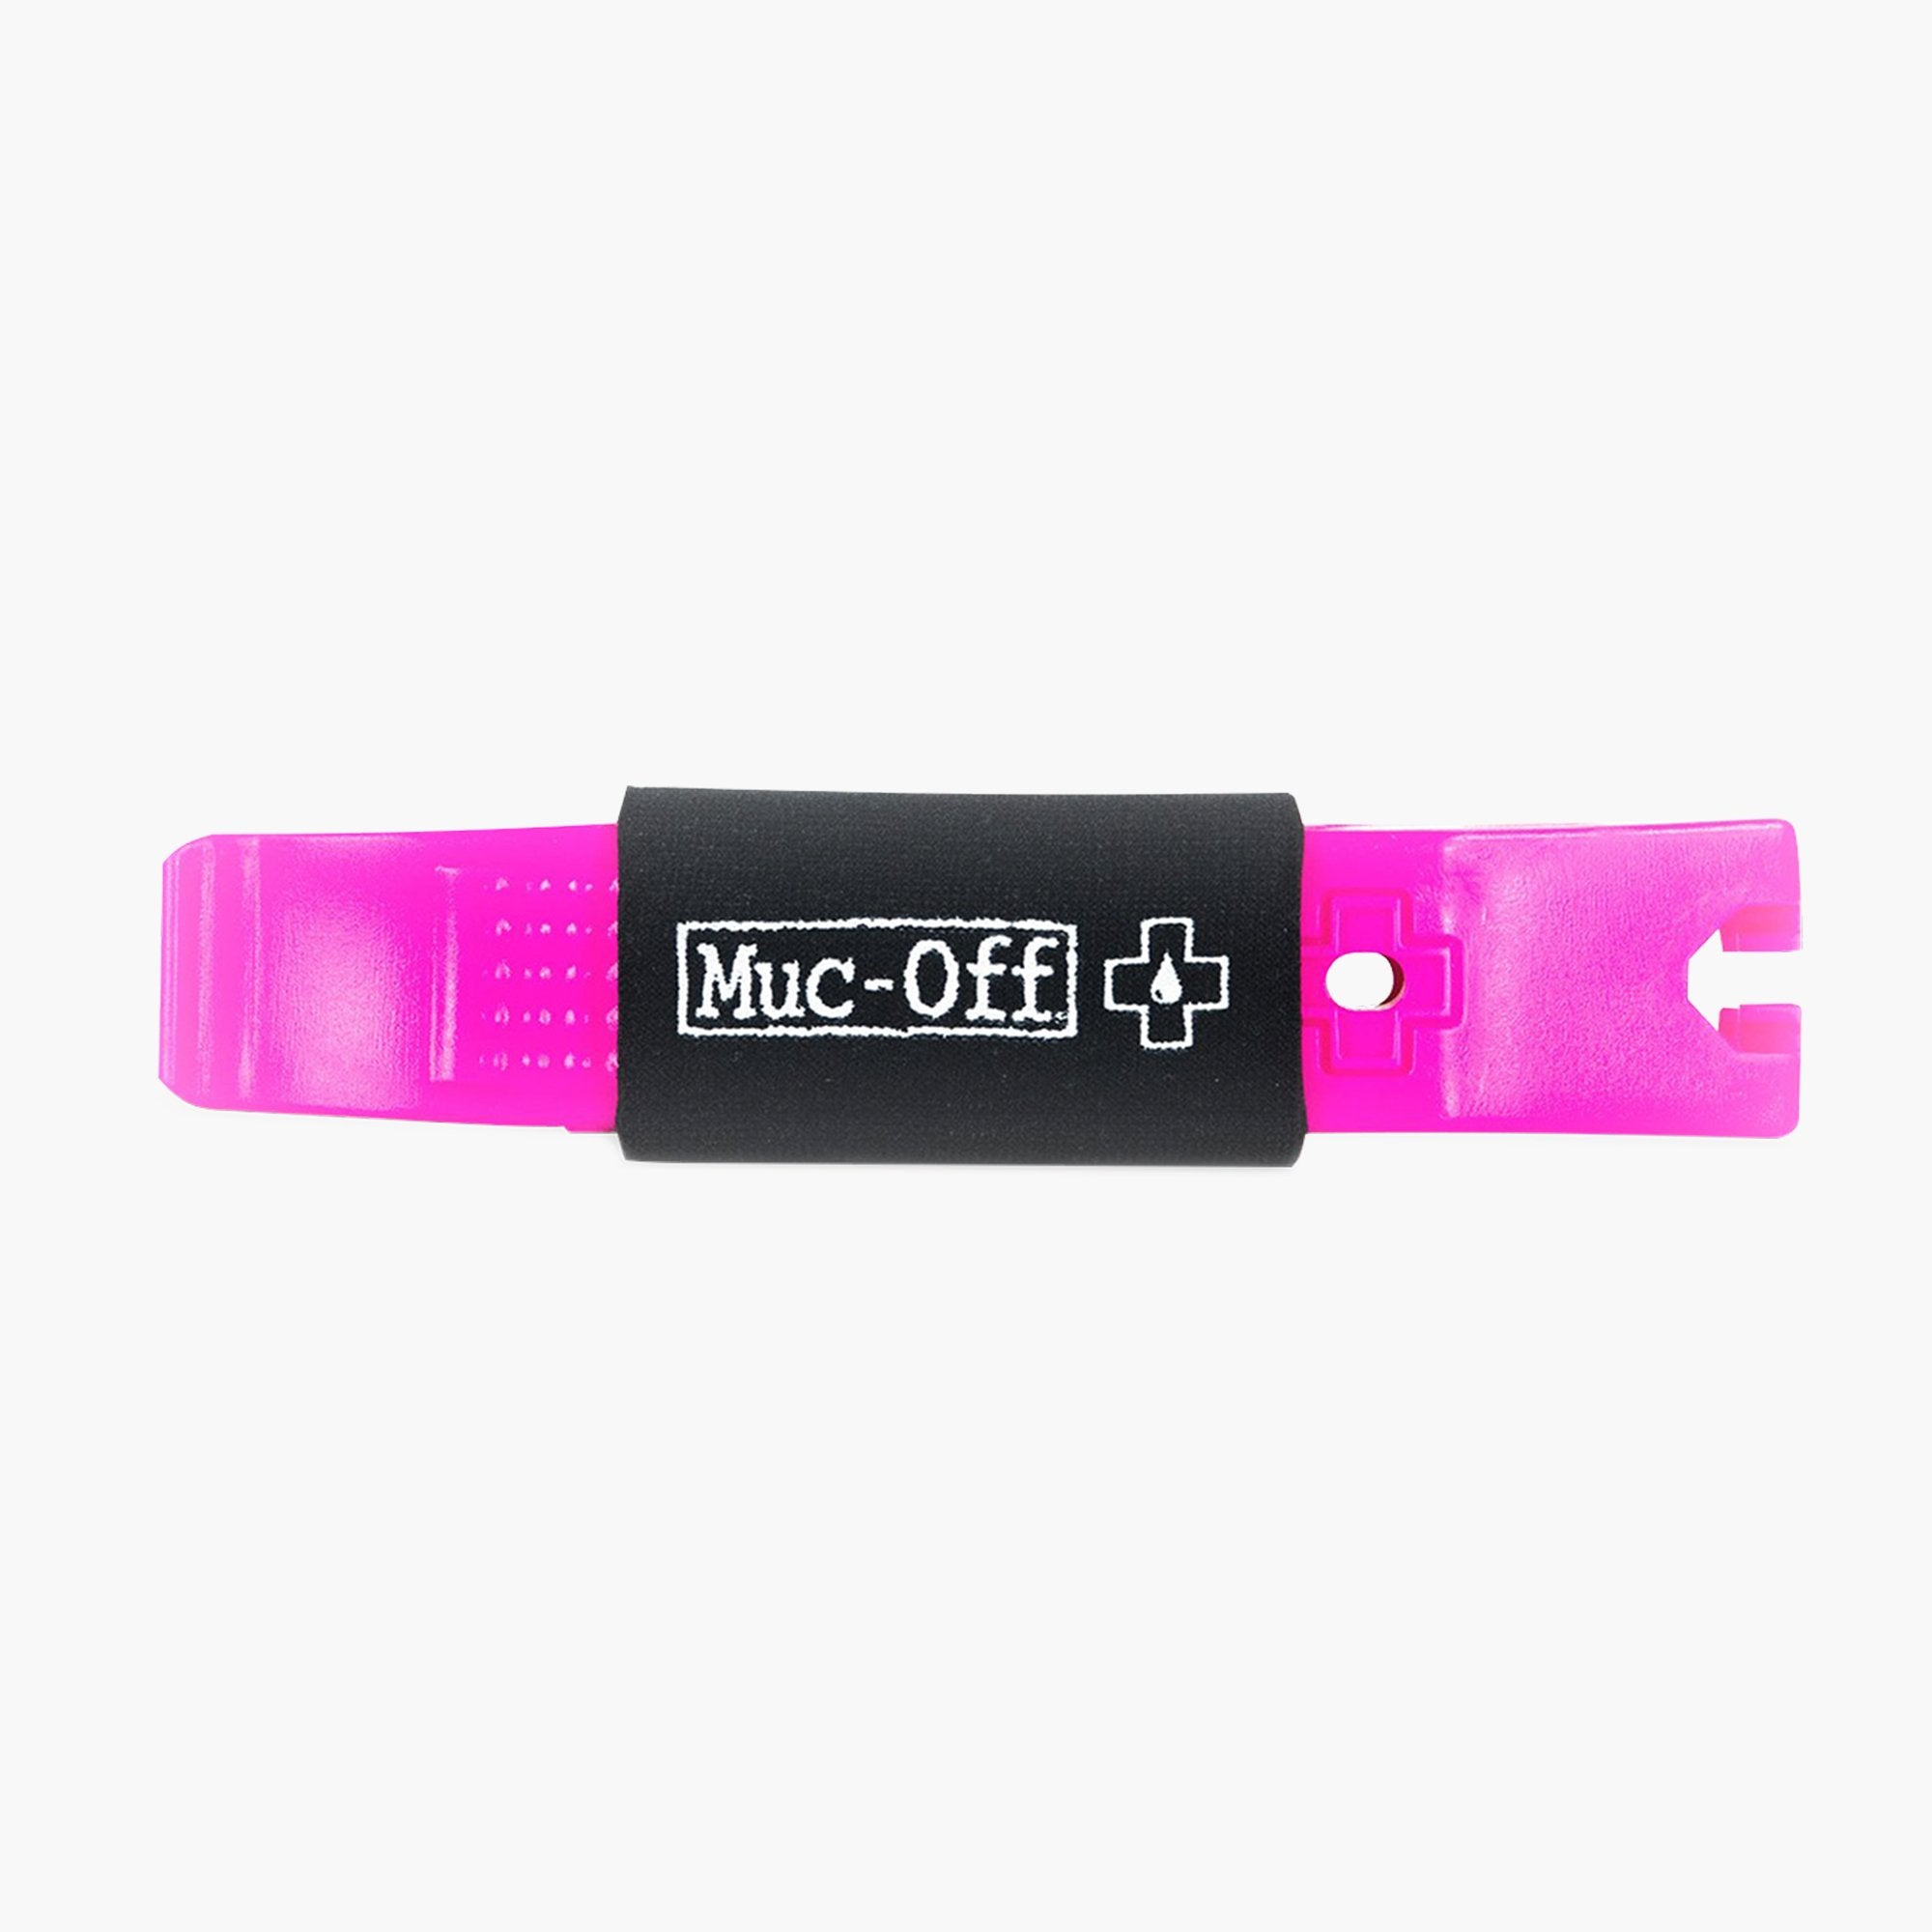 Muc-Off Rim Stix Tyre Lever Pink ( 2x included )